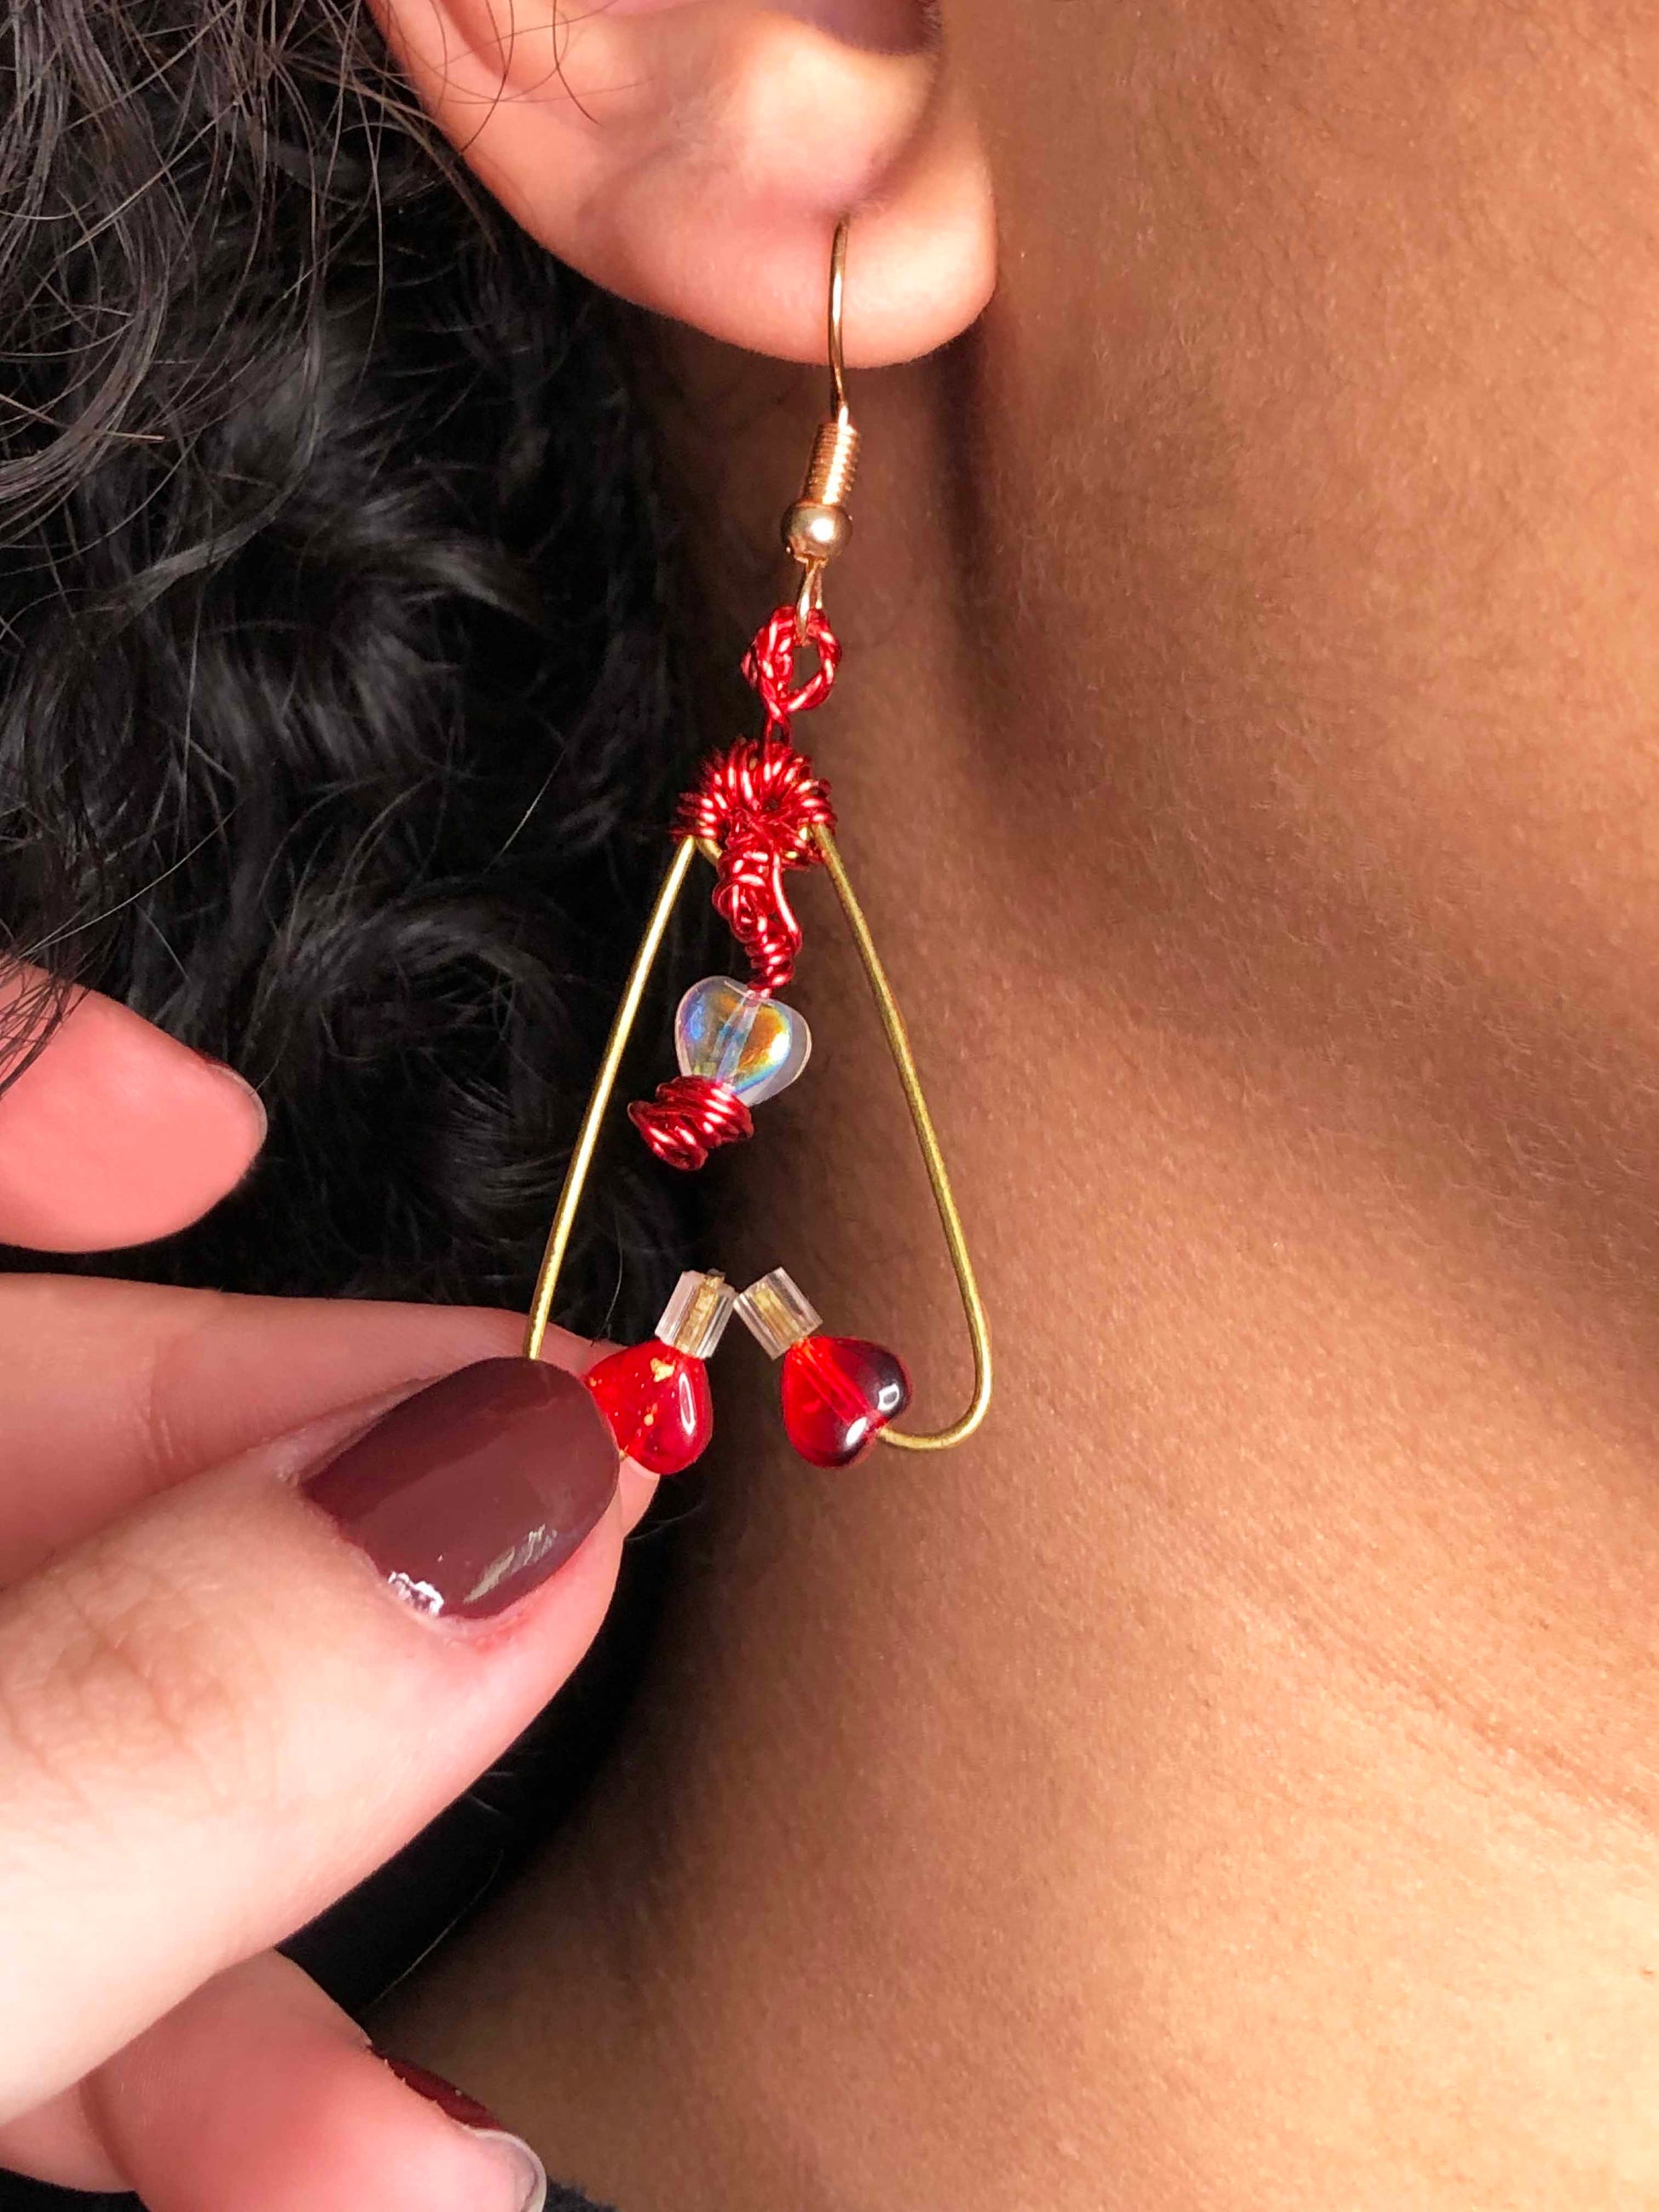 A pair of mismatched asymmetrical earrings wire wrapped using red and gold wires with clear & red heart beads, and a red crystal bead.